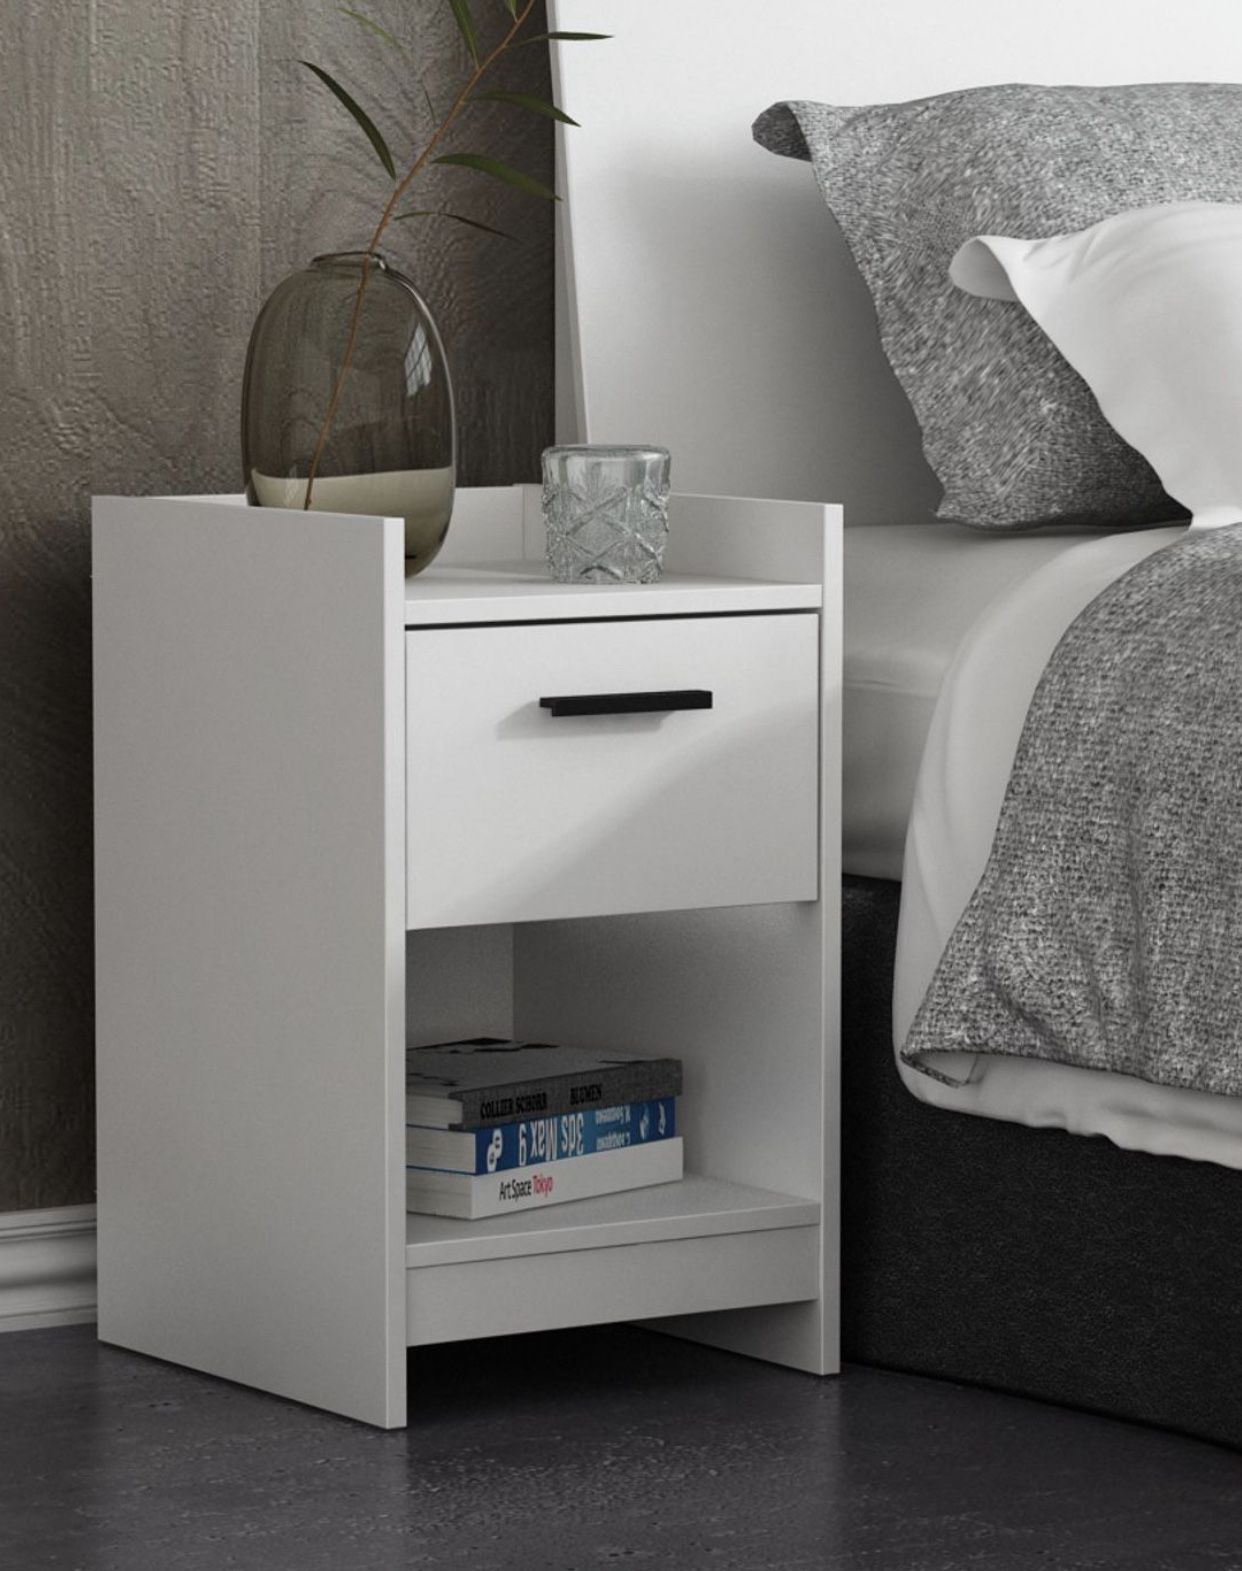 Brand New Contemporary White and Black One Drawer Nightstand Bookcase Organizer